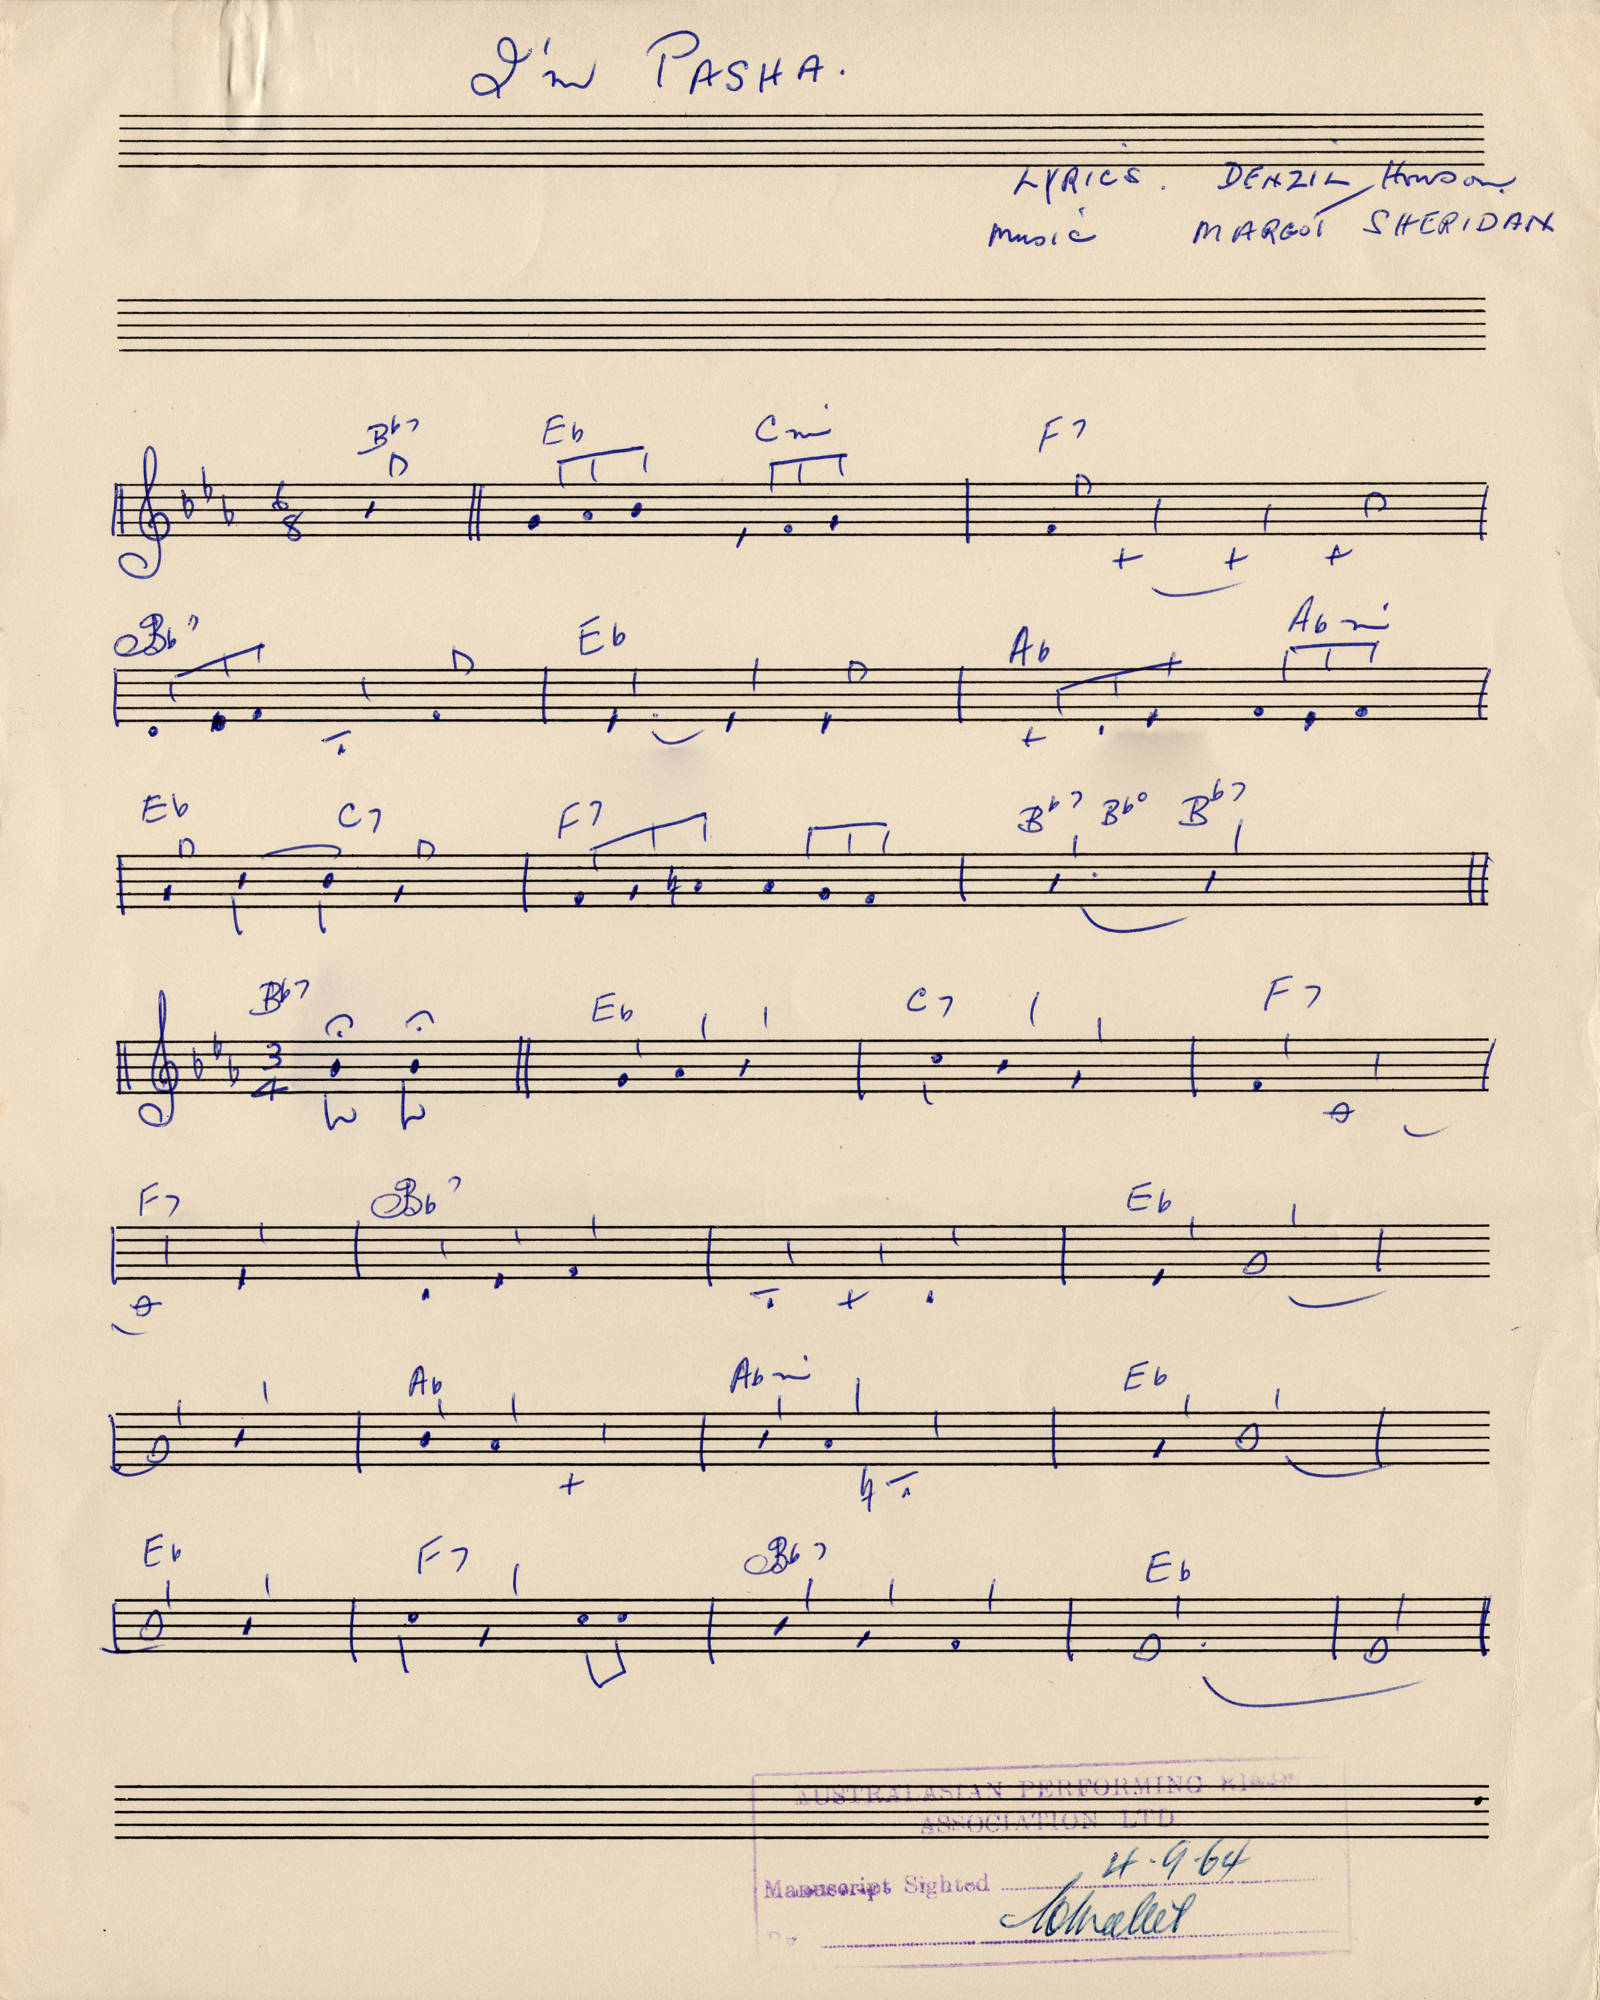 music score of “Pasha the Dasher” song